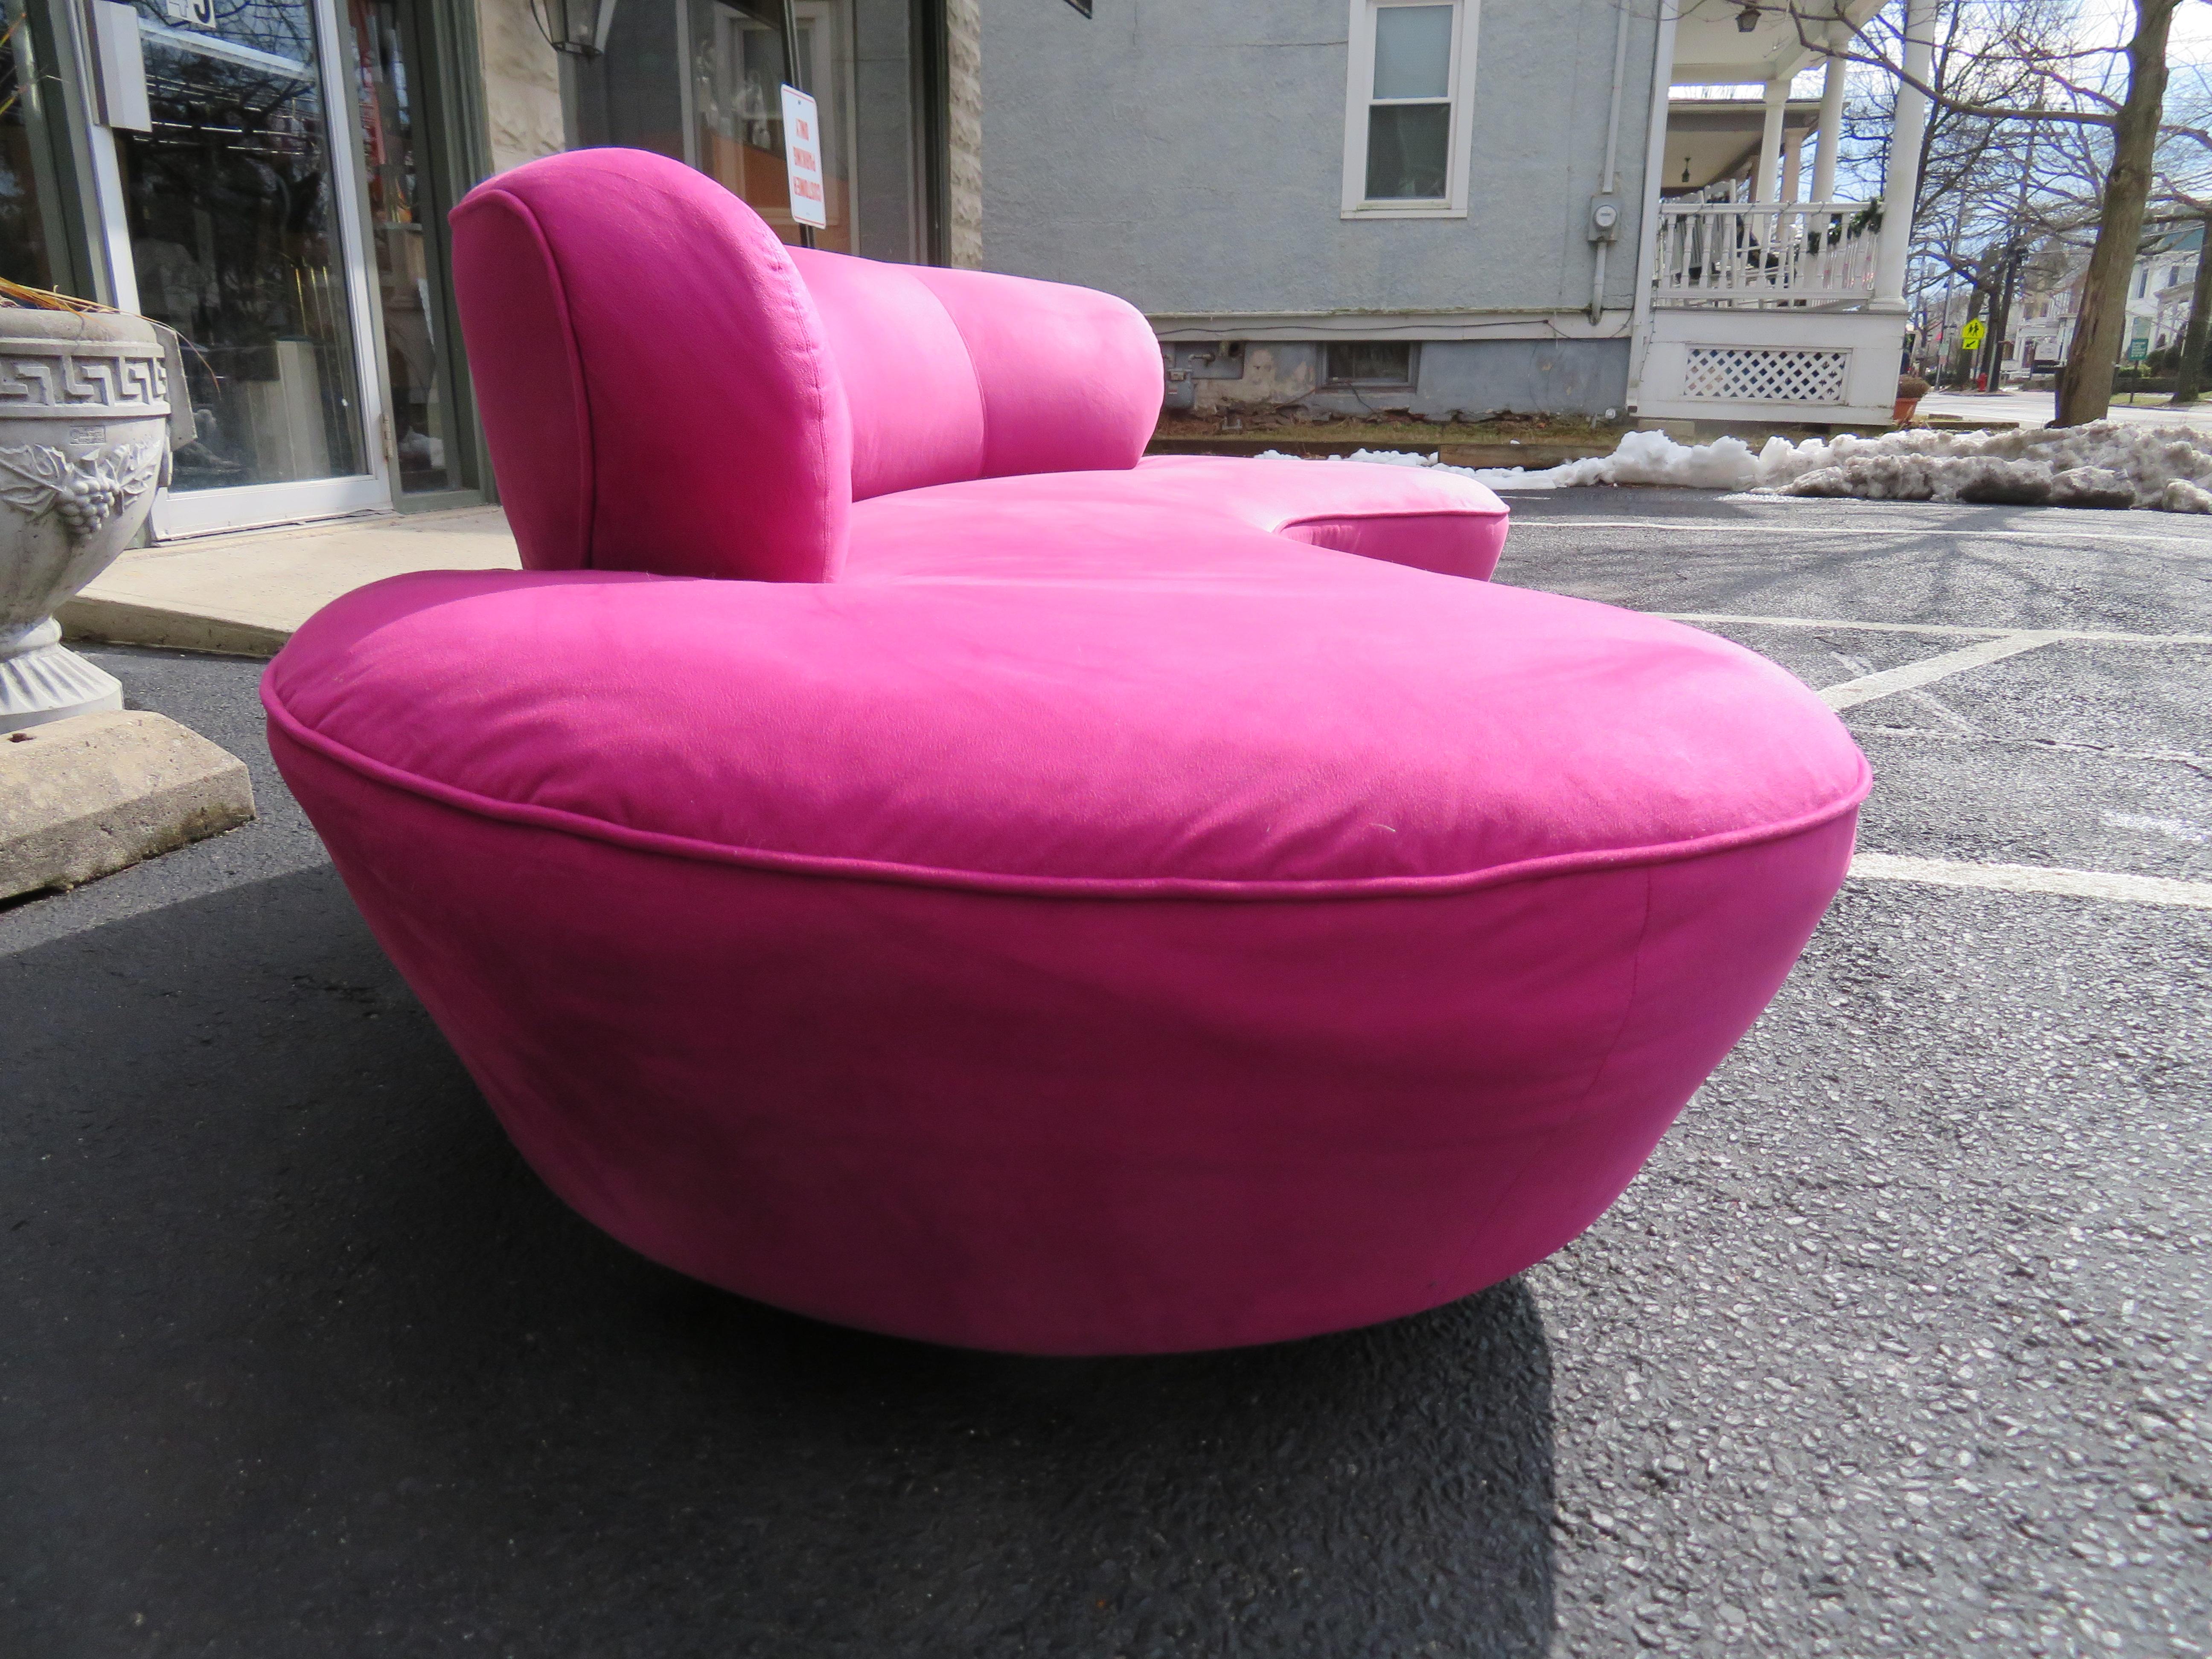 Late 20th Century Gorgeous Vladimir Kagan Curved Cloud Sofa for Directional, Mid-Century Modern